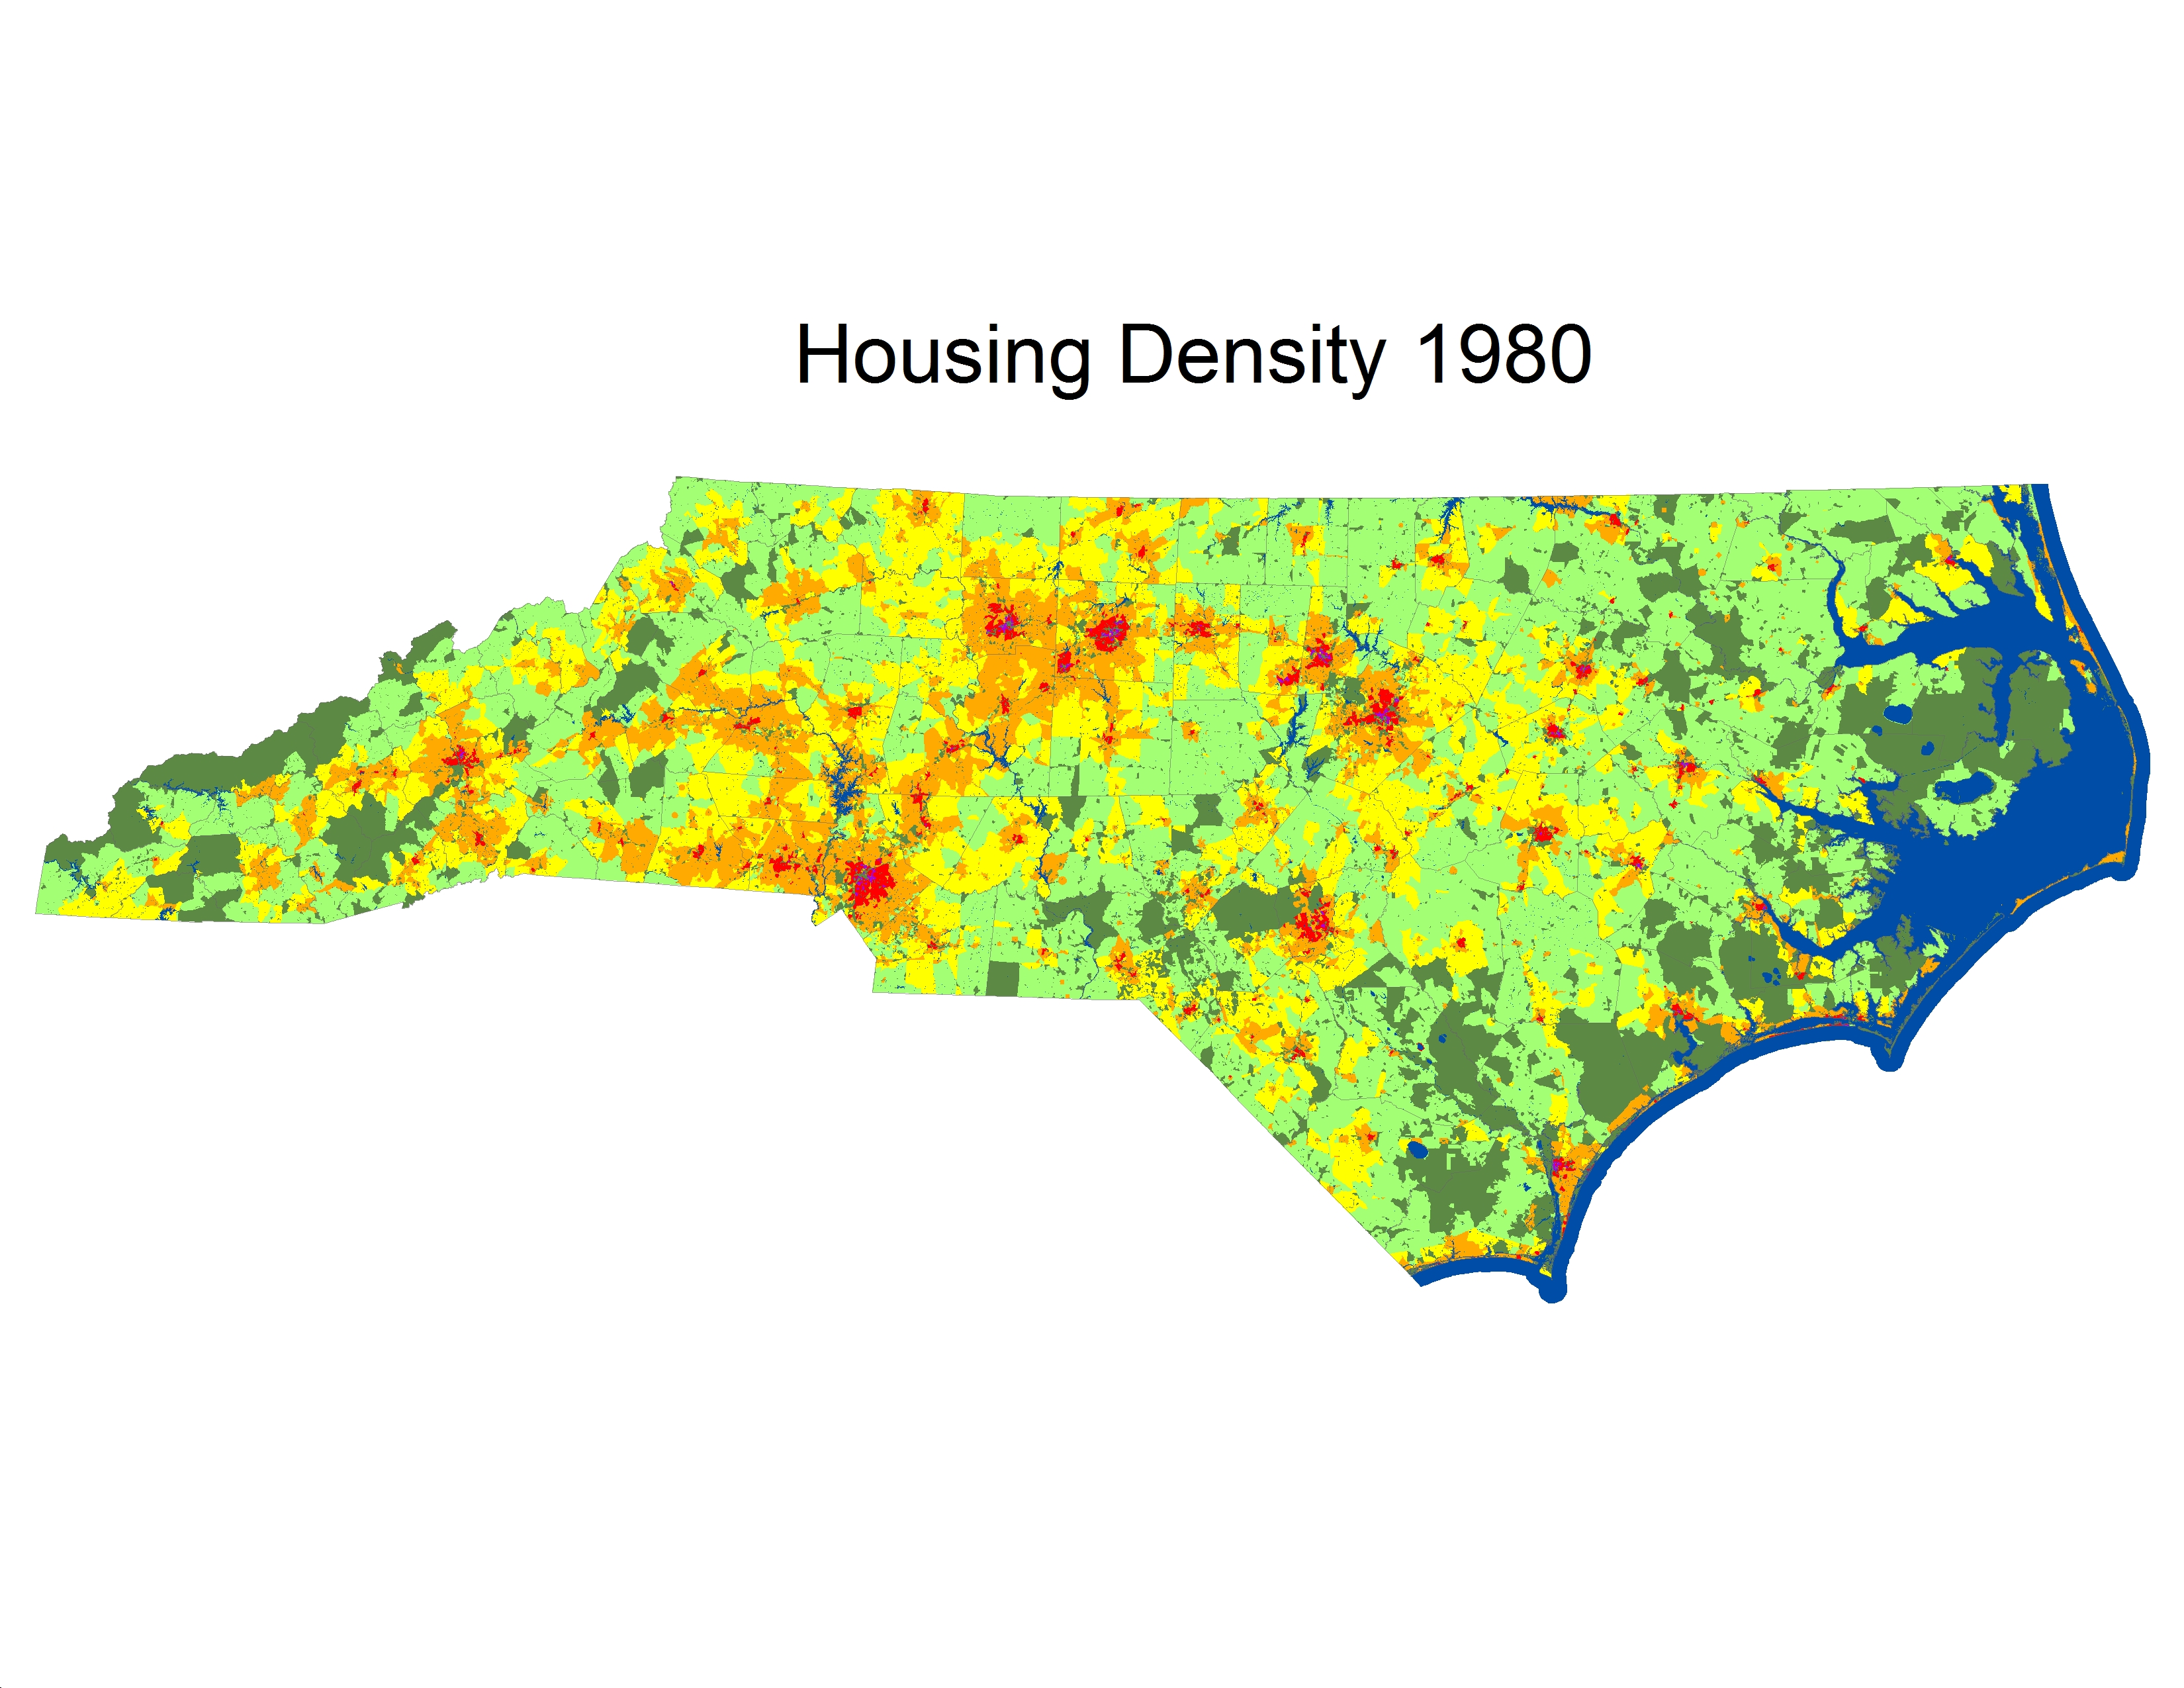 Housing density in North Carolina in 1980 was much lower in rural areas.